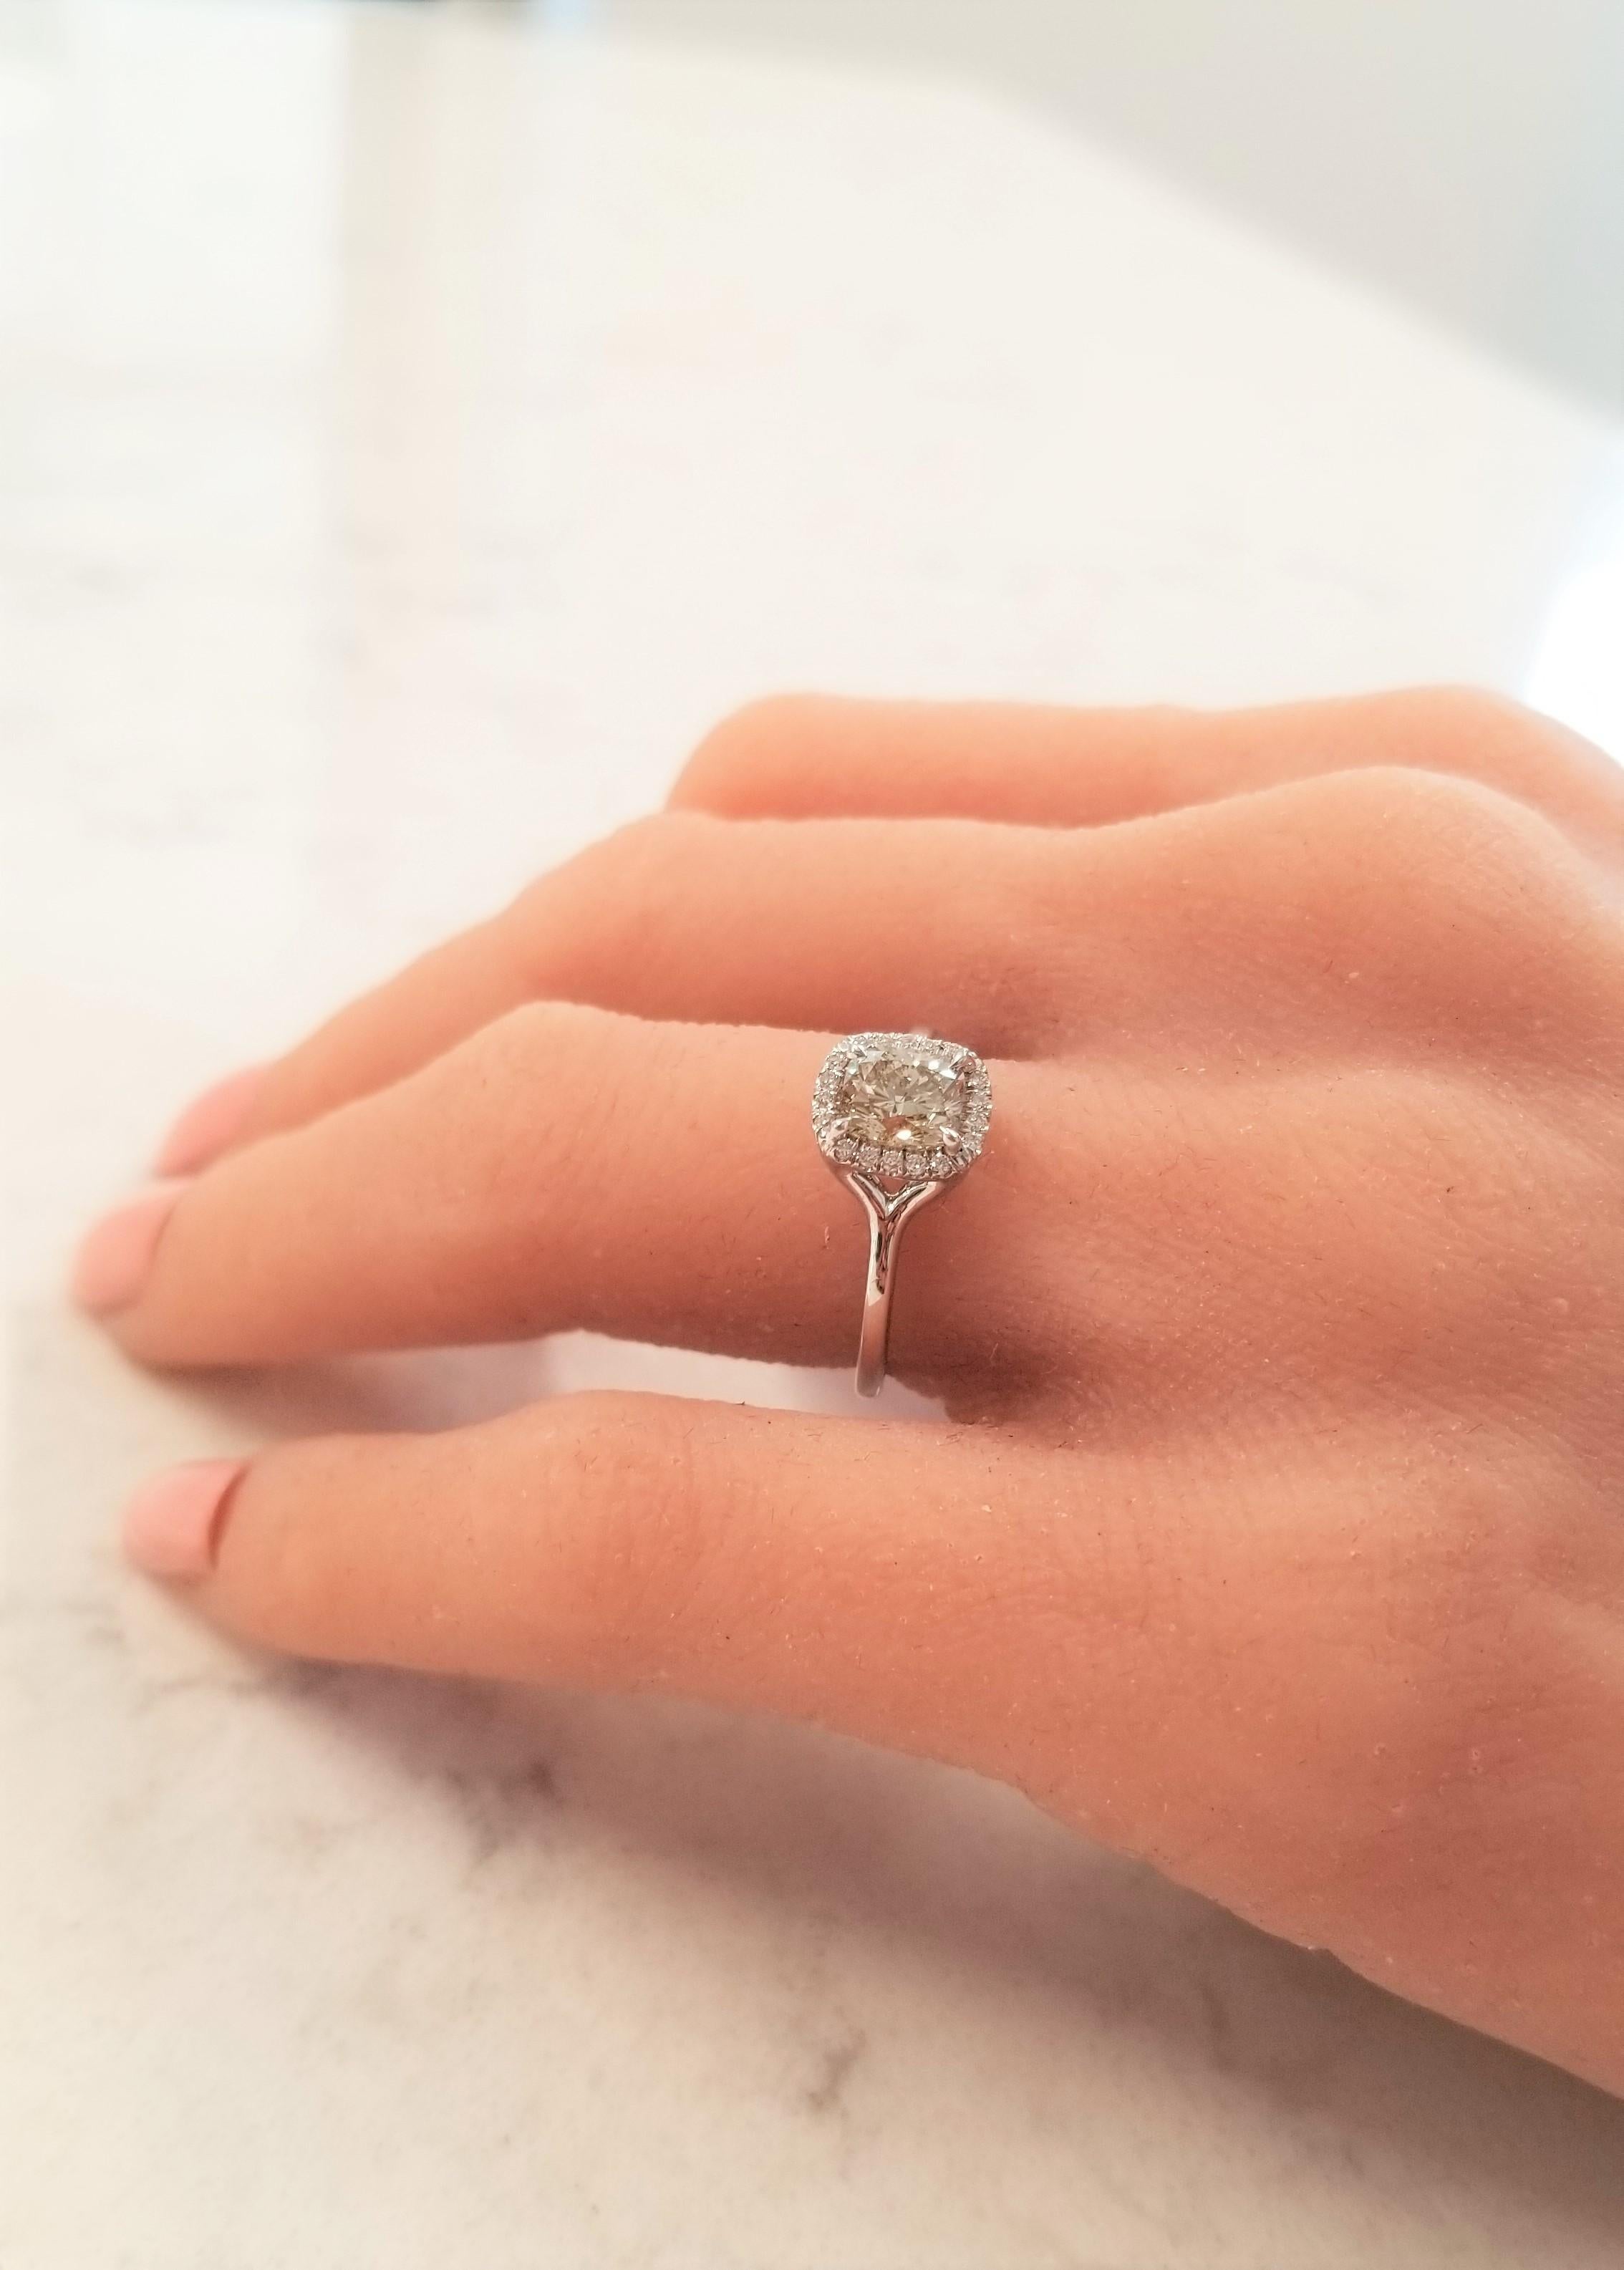 Simple never looked so stunning! This is an 18k white gold solitaire ring, which features a GIA certified light brownish-greenish yellow cushion-cut 1.00 carat center diamond. Then the style is kicked up a notch with 0.12 carat of brilliant diamonds